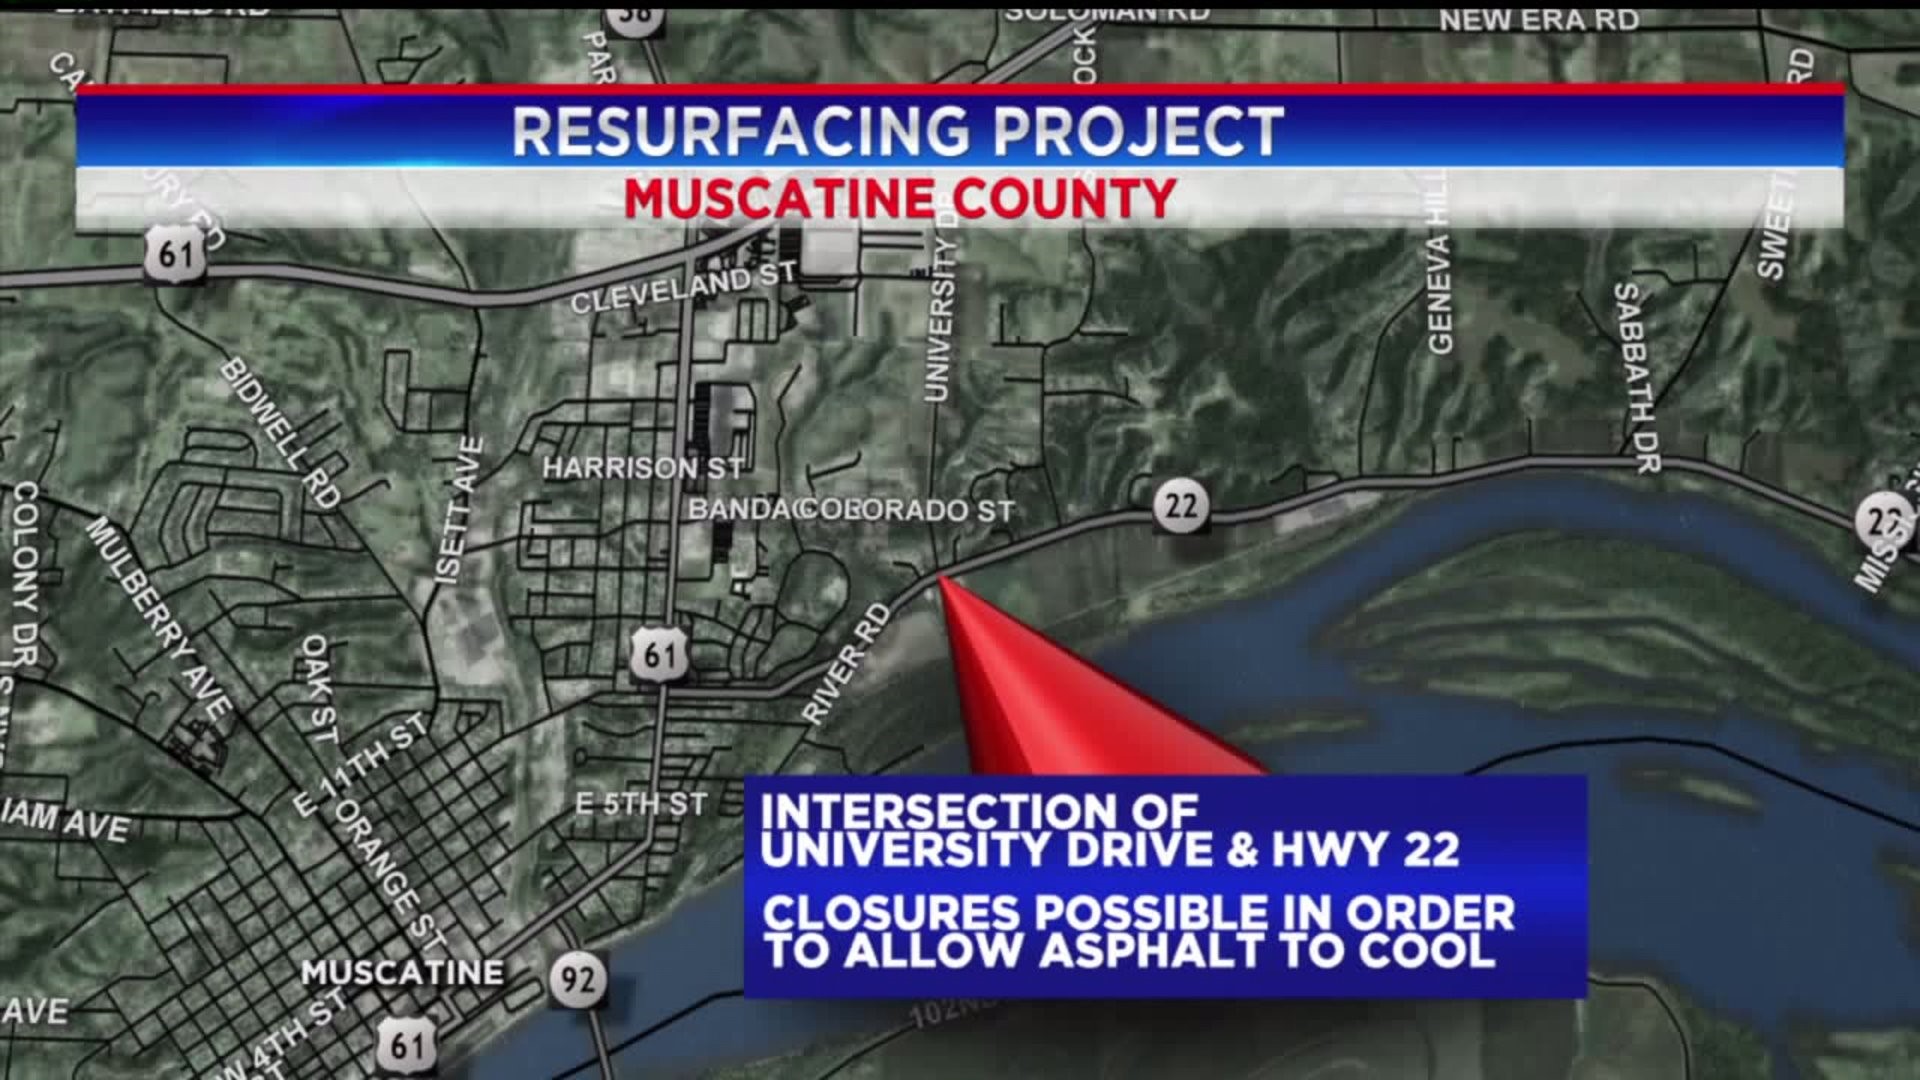 Road work in two areas may impact your commute in Muscatine